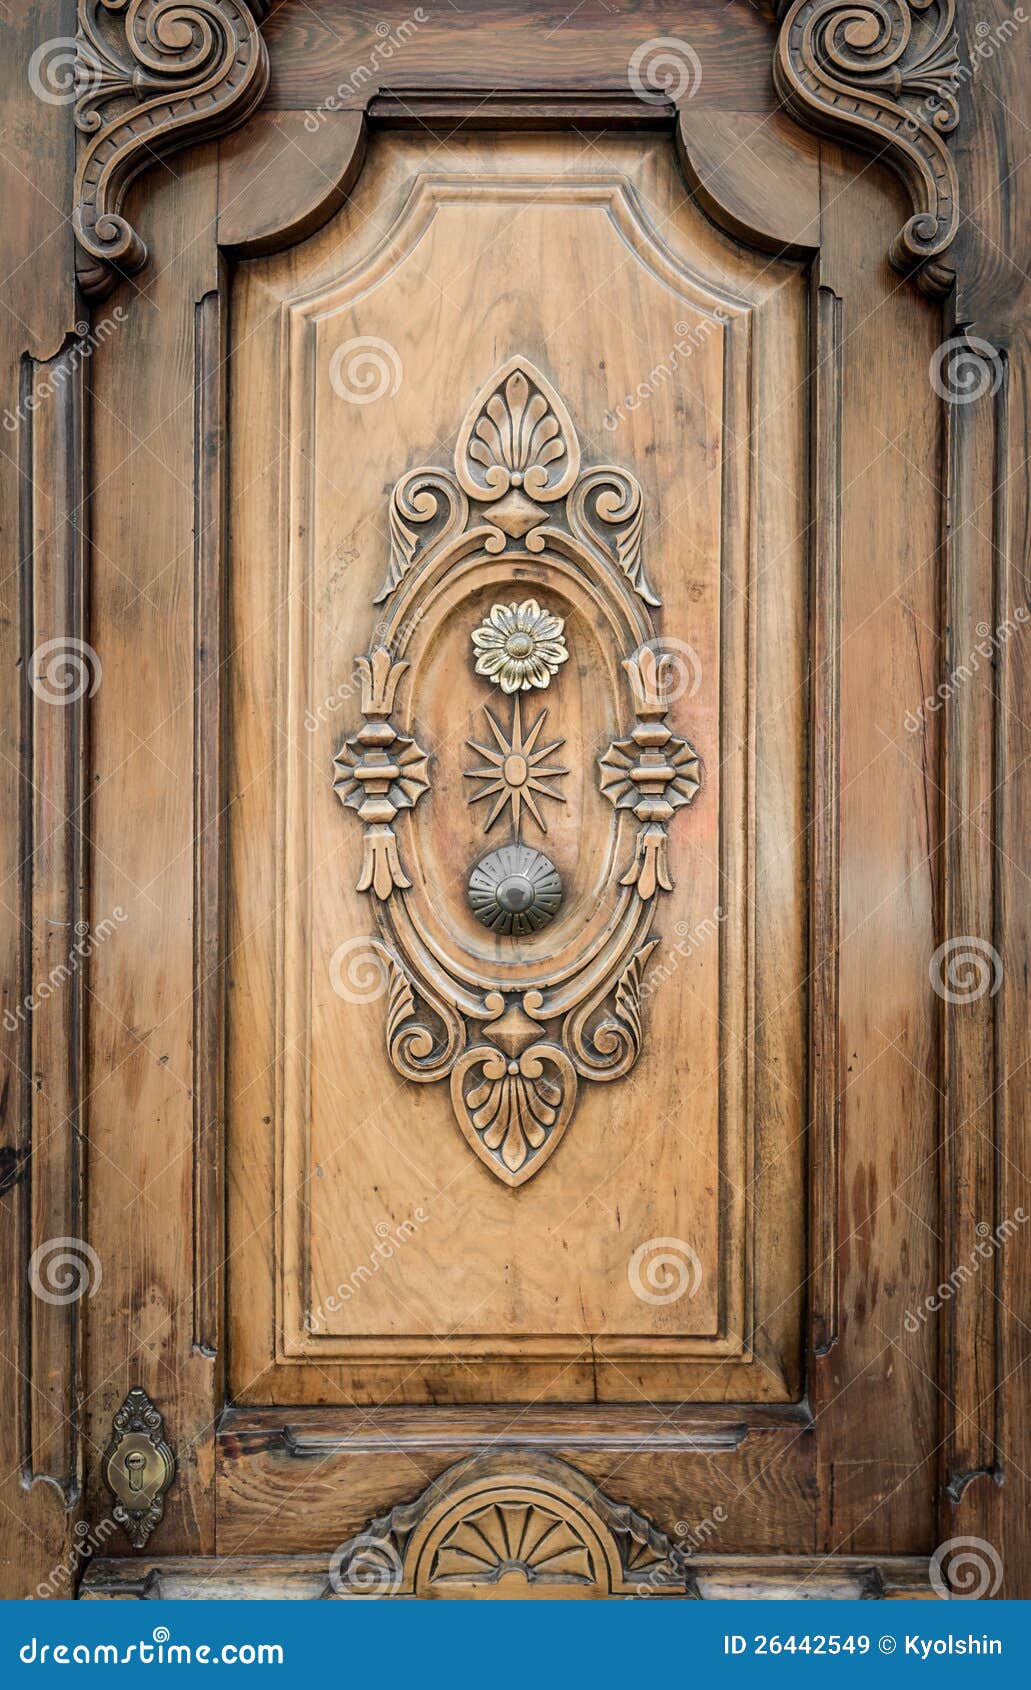 Old Door Of Wood With Patterns Carved On It. Royalty Free Stock ...